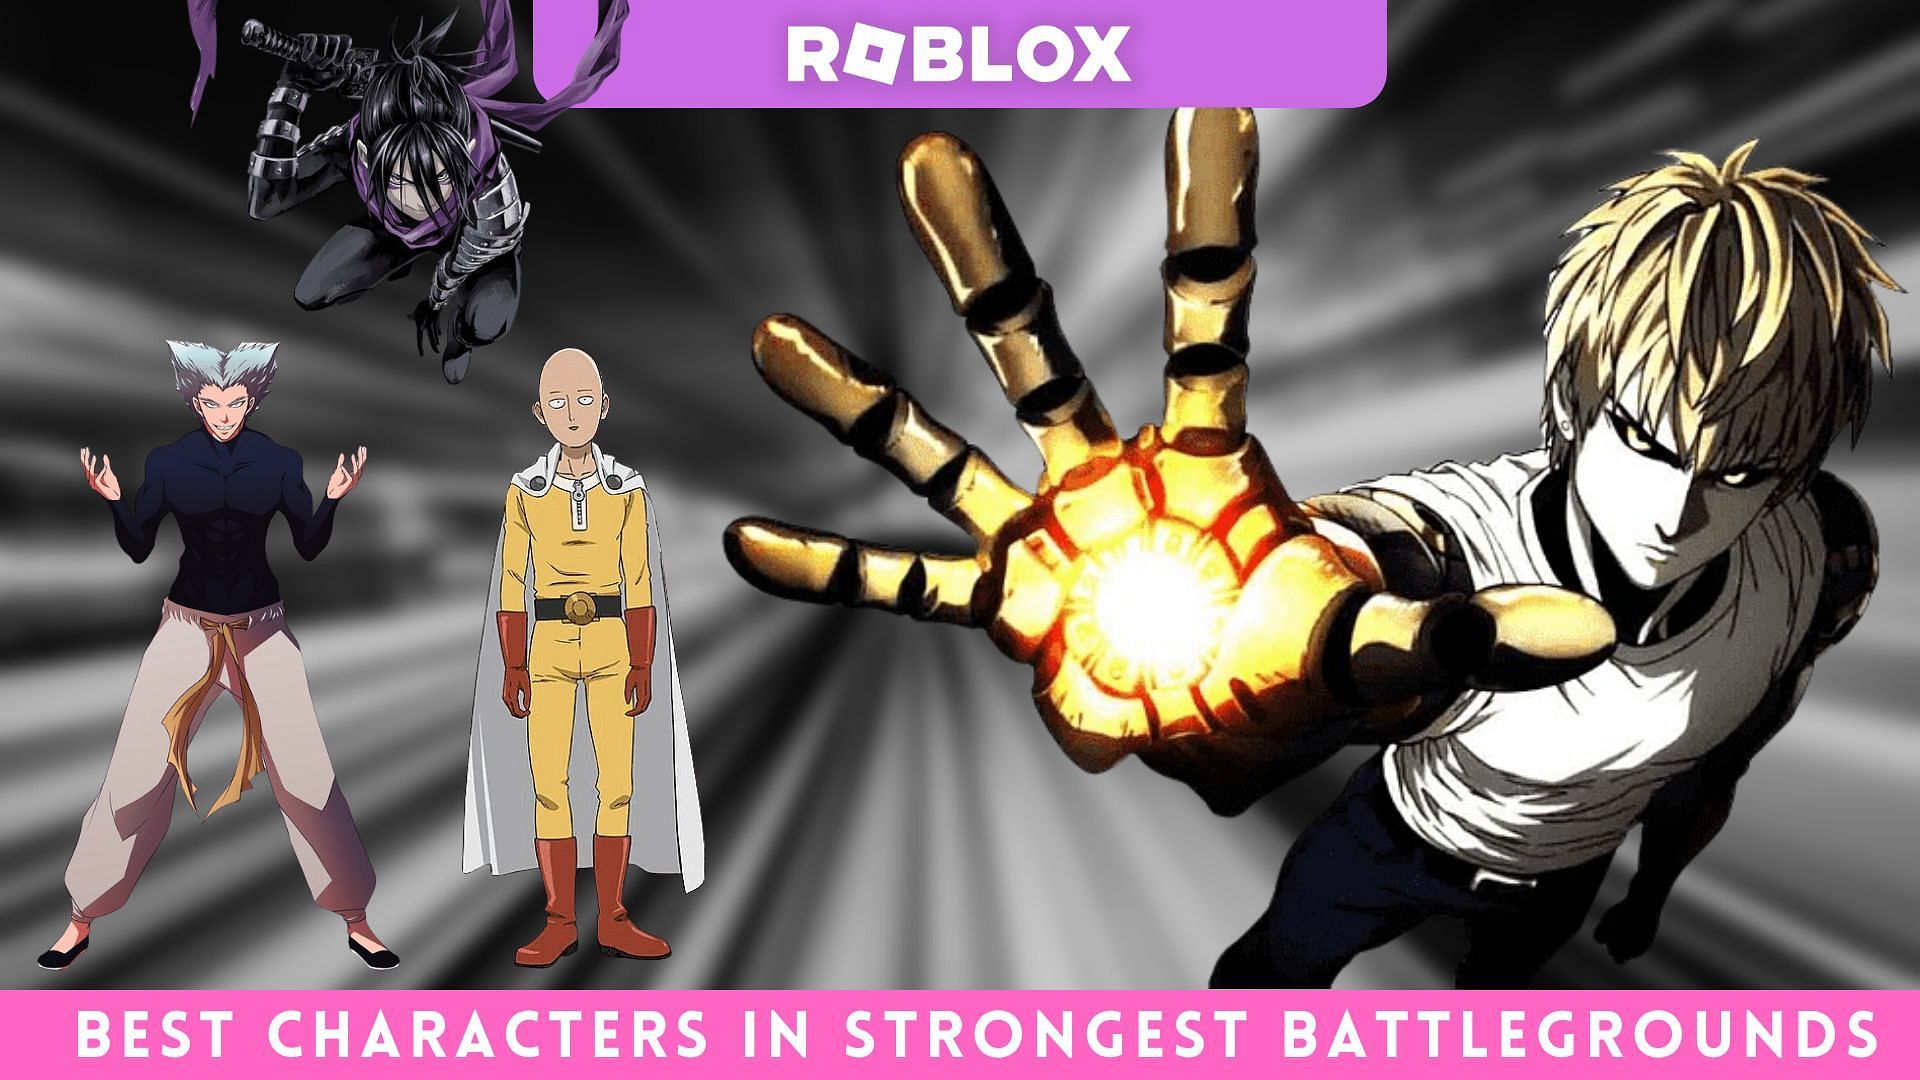 Roblox The Strongest Battlegrounds: How to play and gamepasses